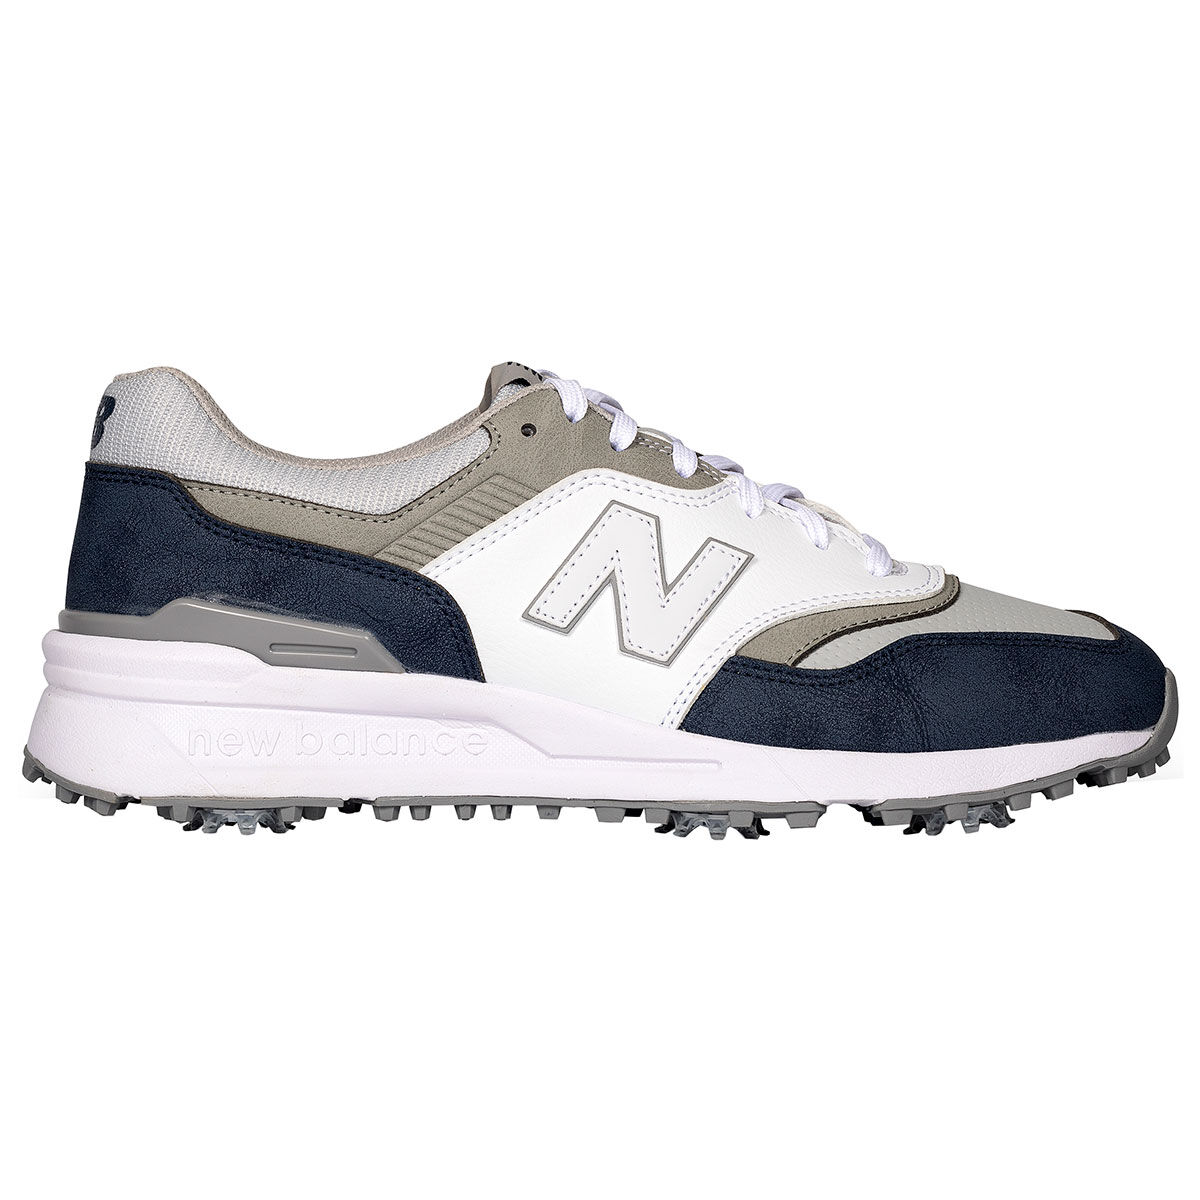 New Balance Men’s 997 Waterproof Spiked Golf Shoes, Mens, Navy/white, 11 | American Golf